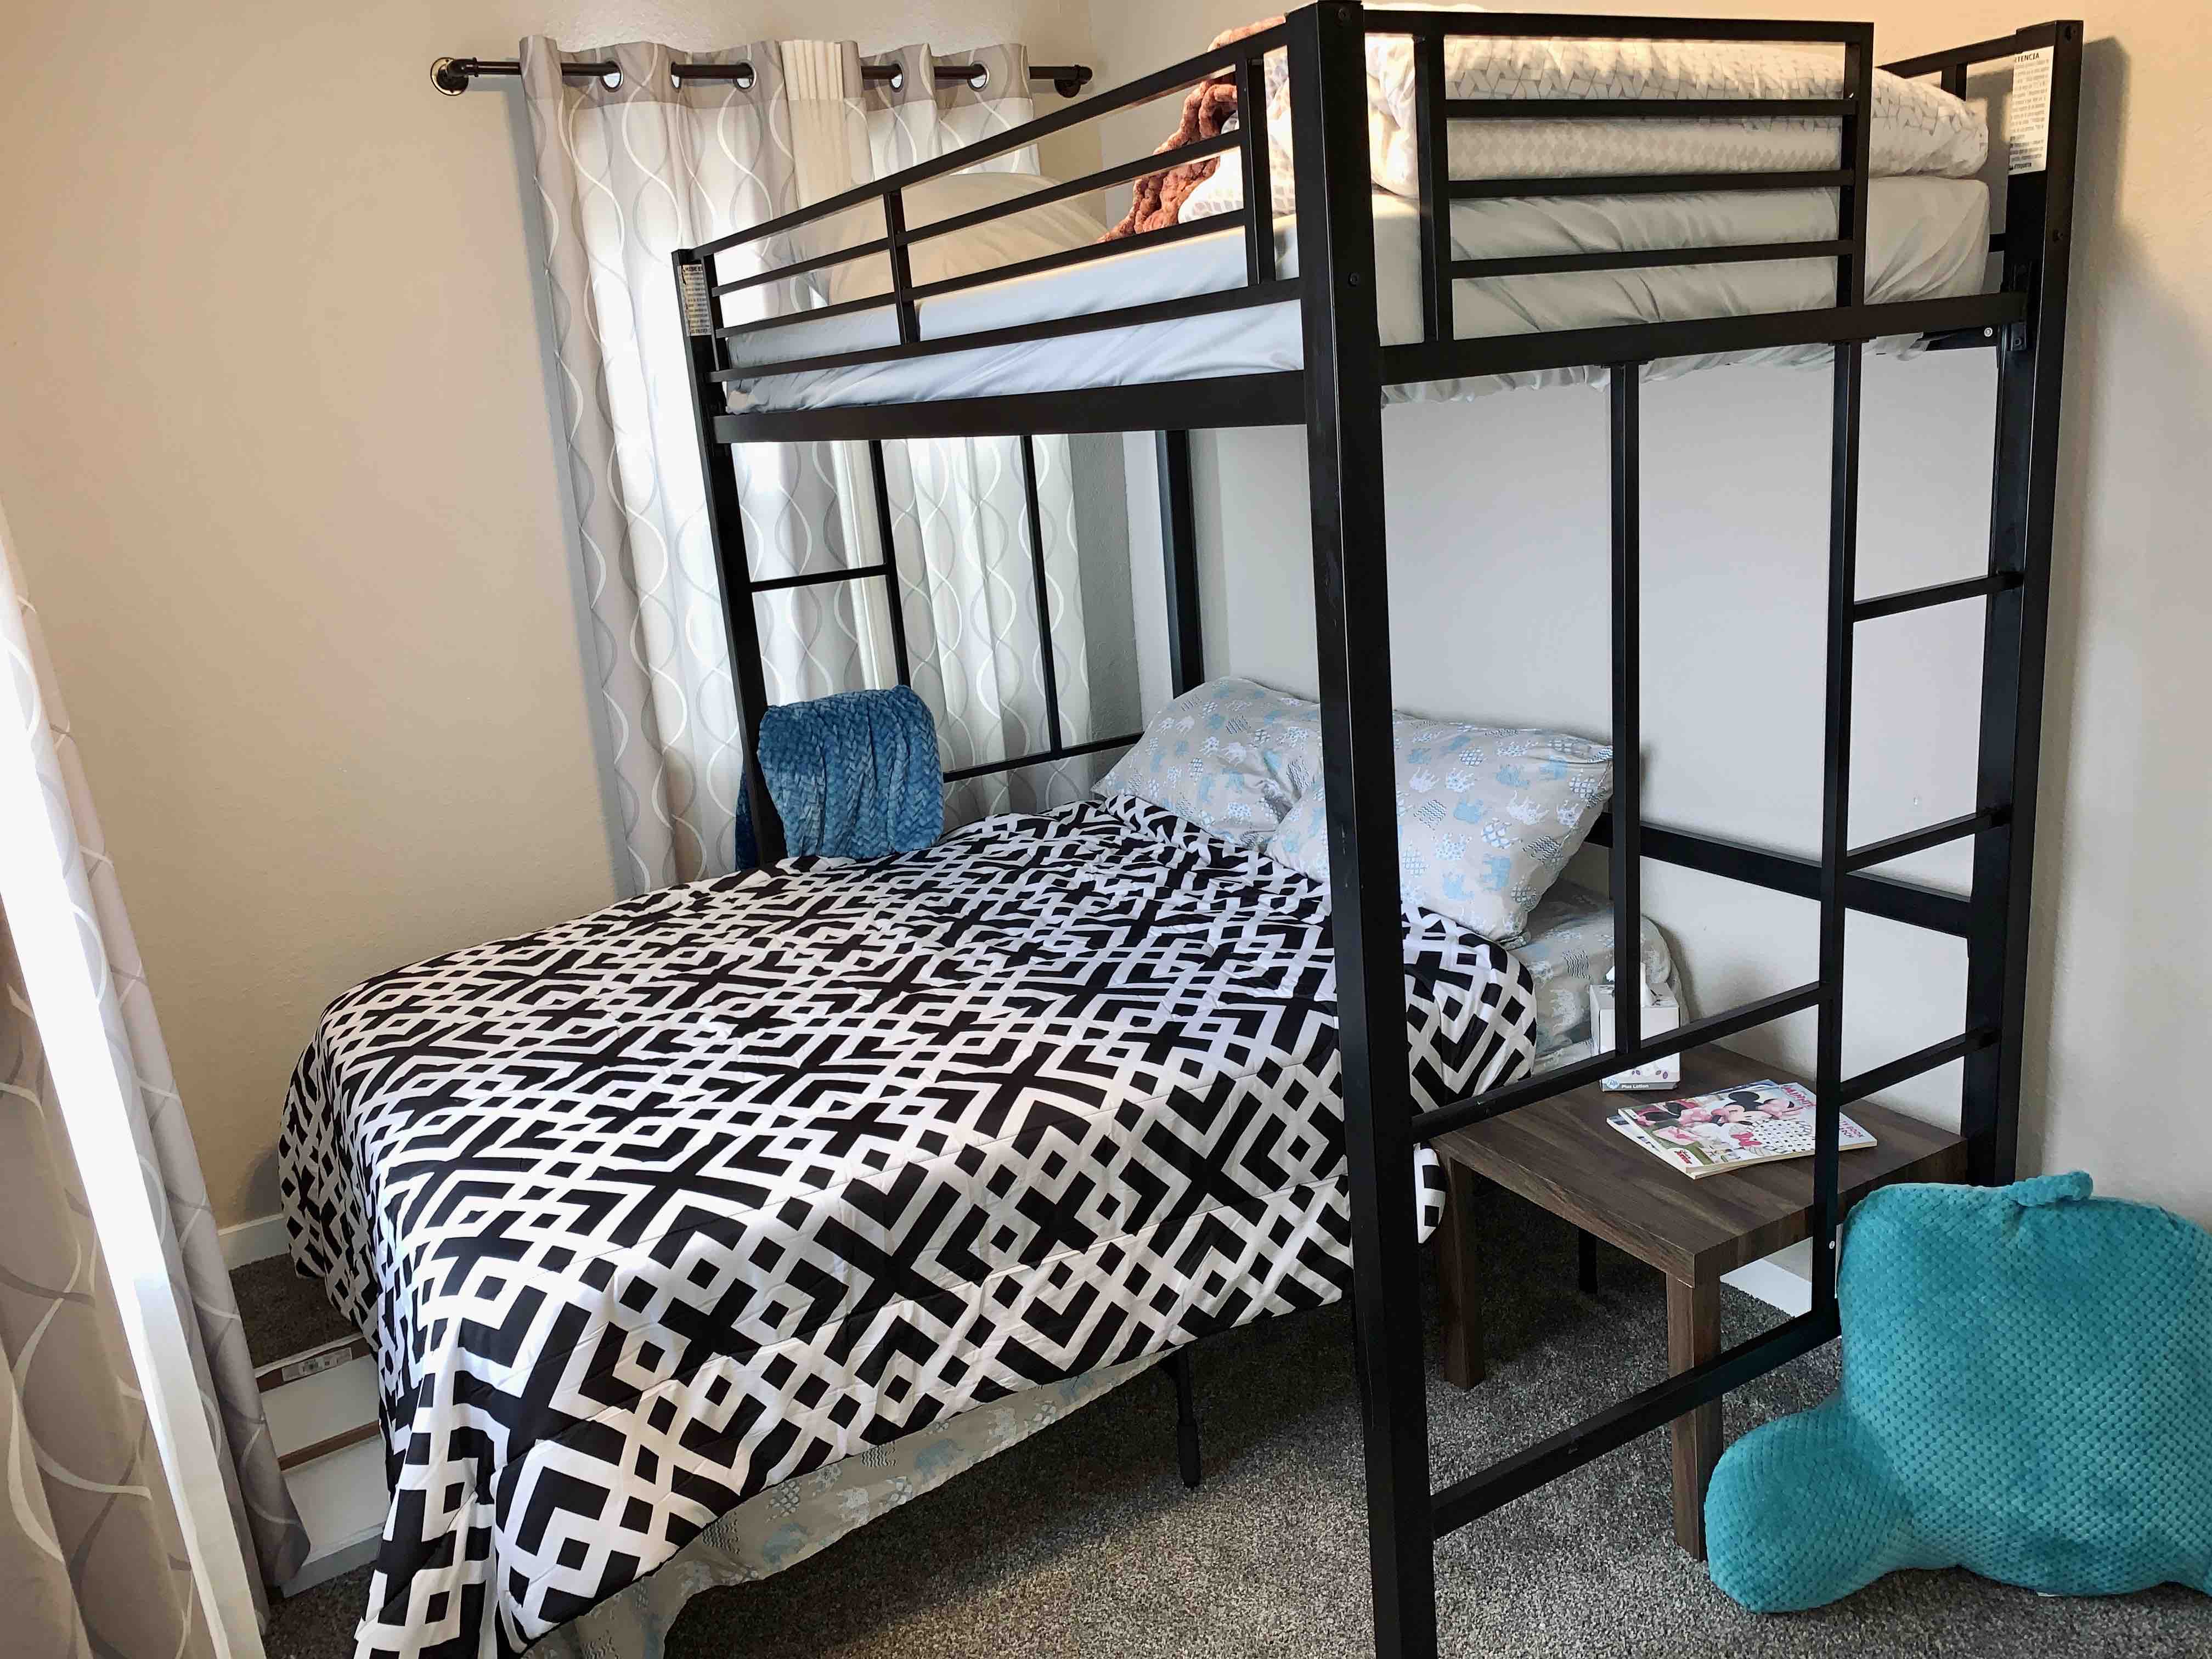 Houses For In Sioux Falls, Bunk Beds Sioux Falls Sd